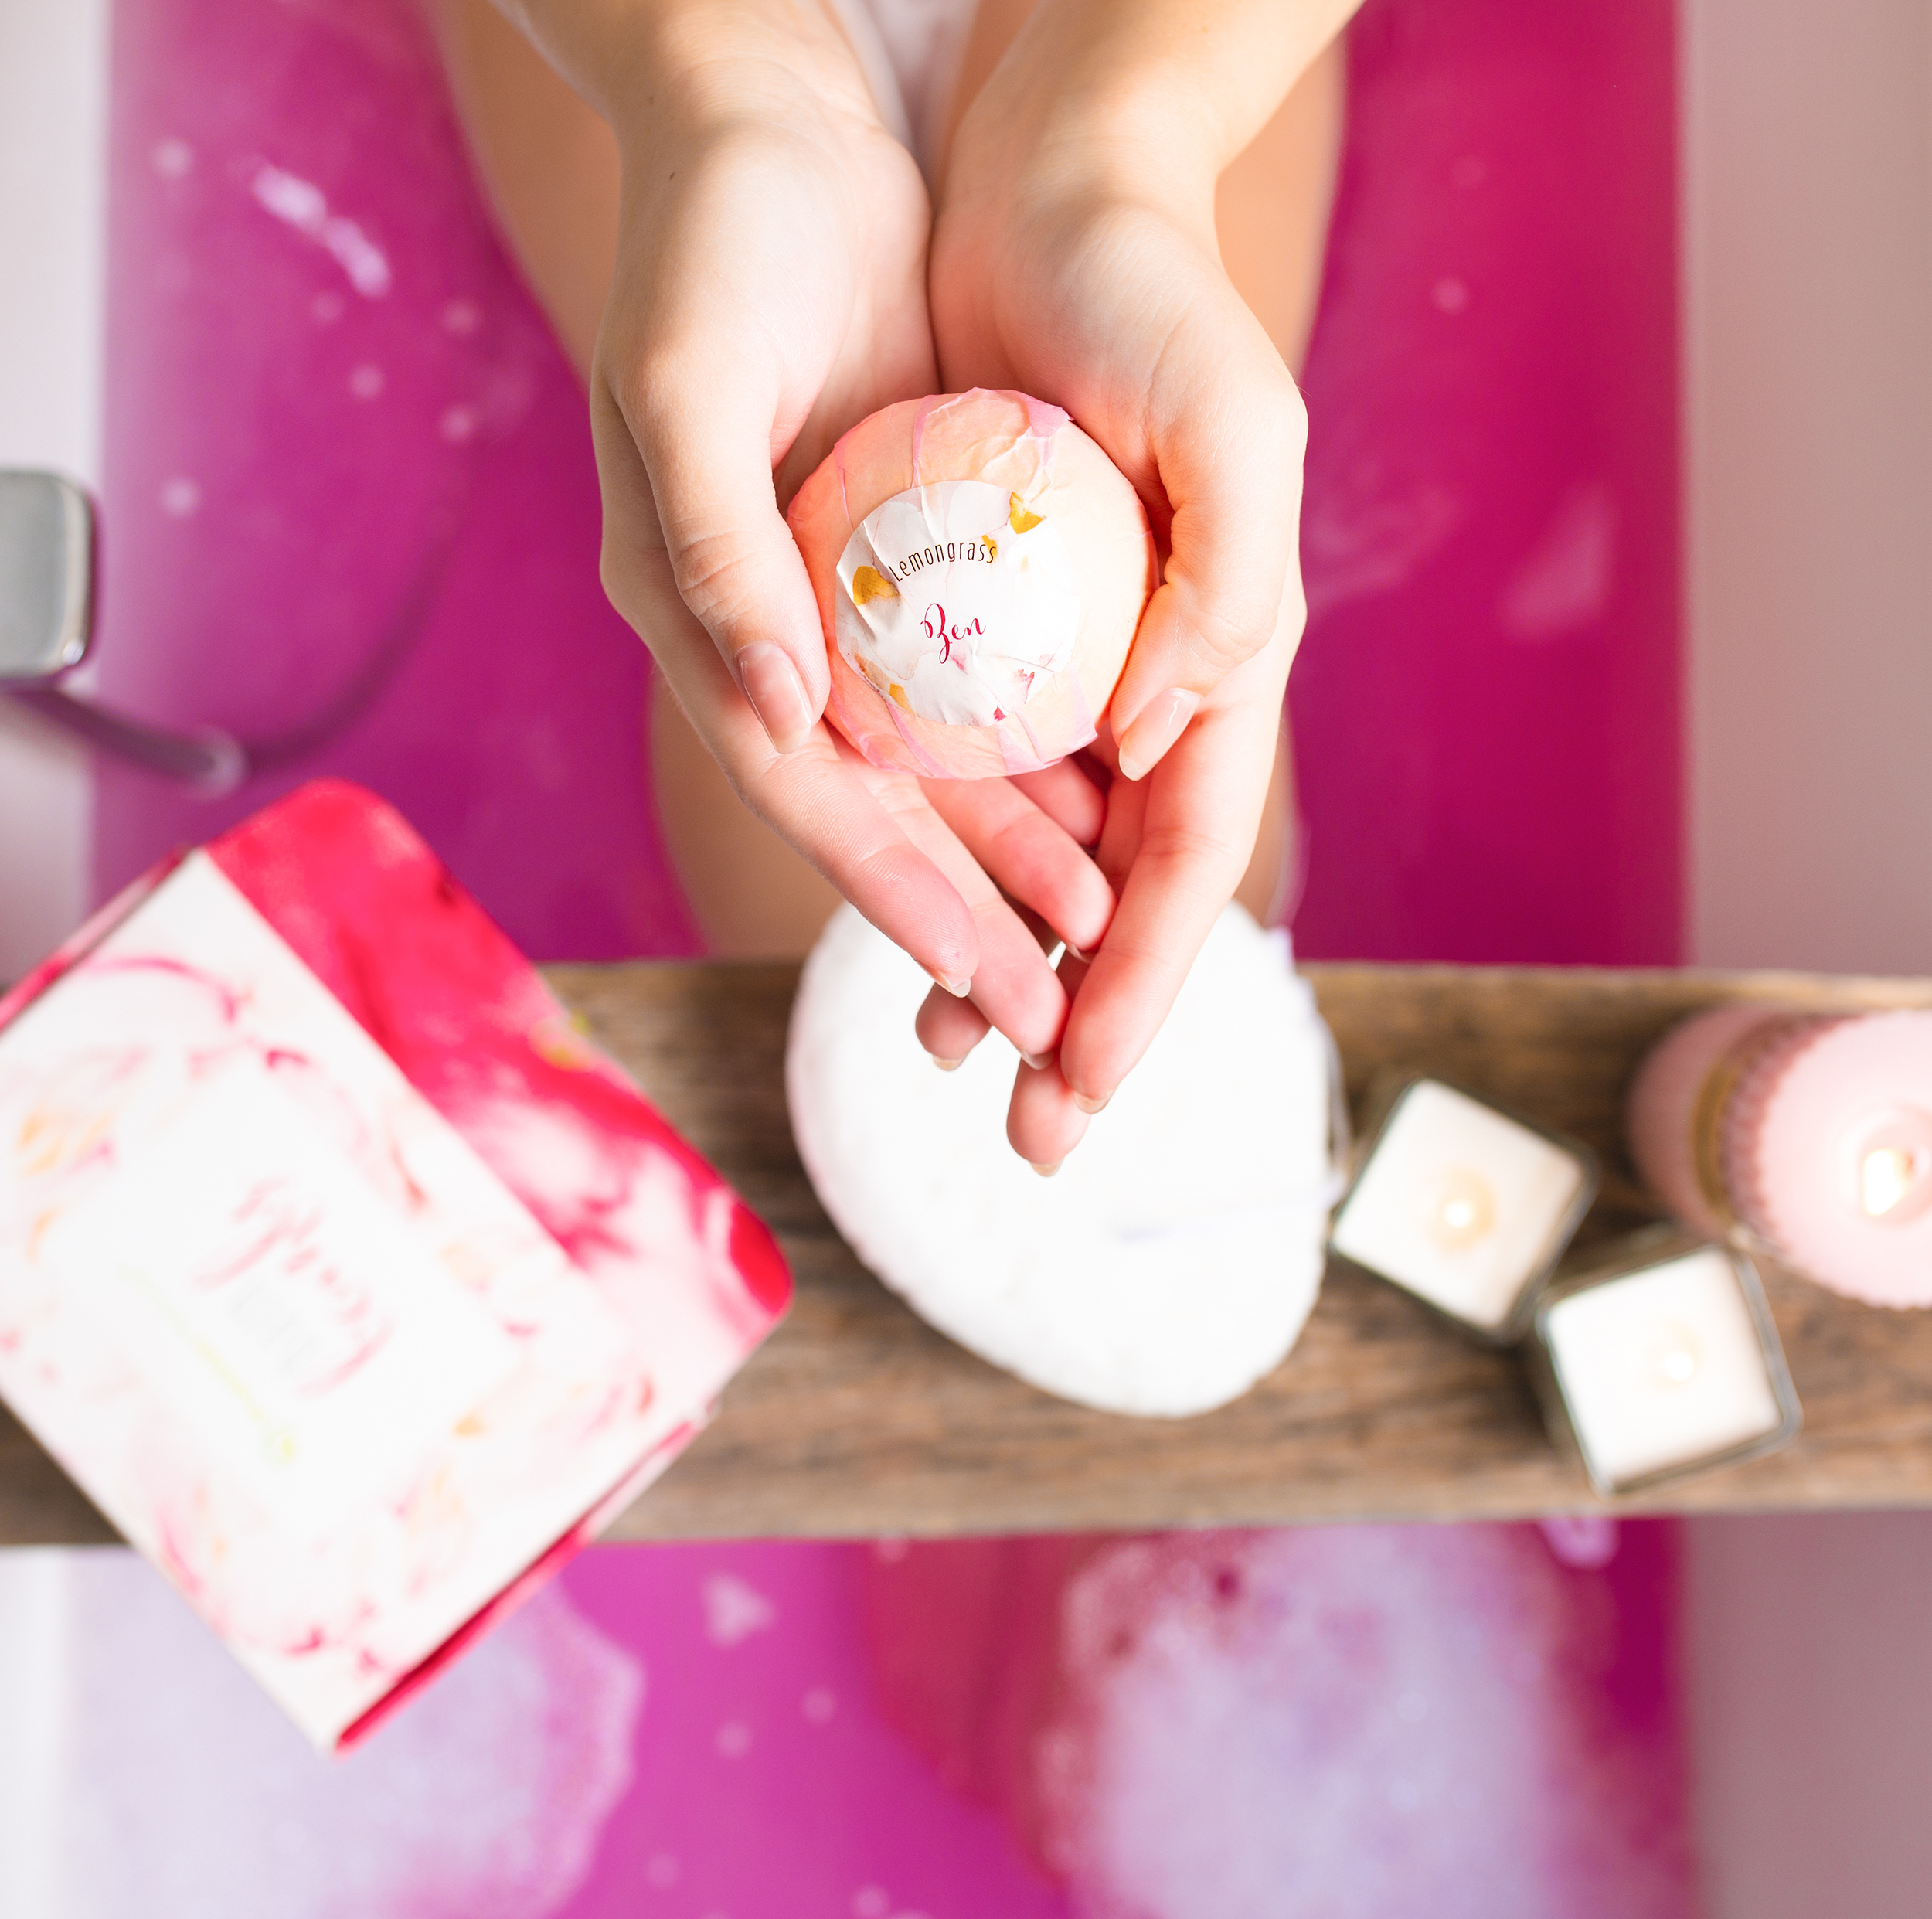 Premium Nature Bath Bombs Gift For Her - Gifts Fizzy For Relaxation by Premium Nature - image 3 of 6